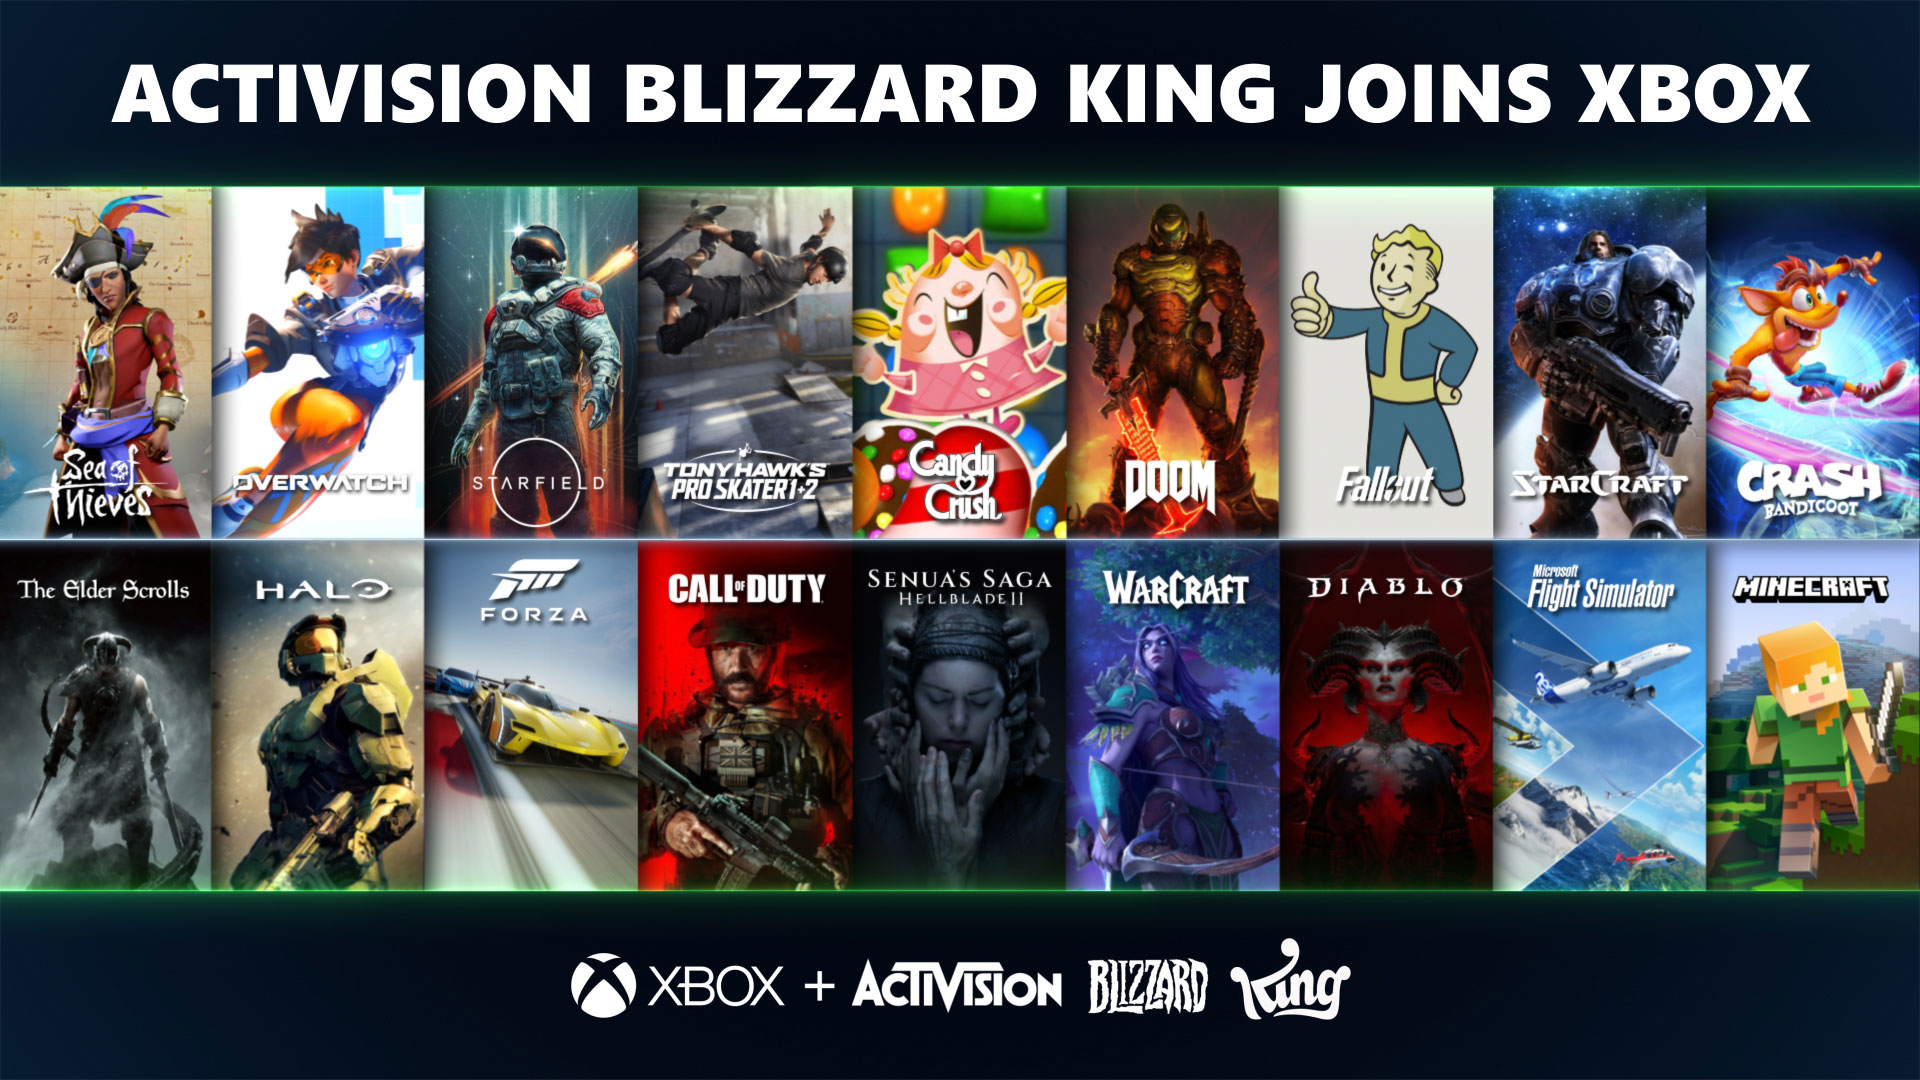 Activision Blizzard King is now officially part of Team Xbox